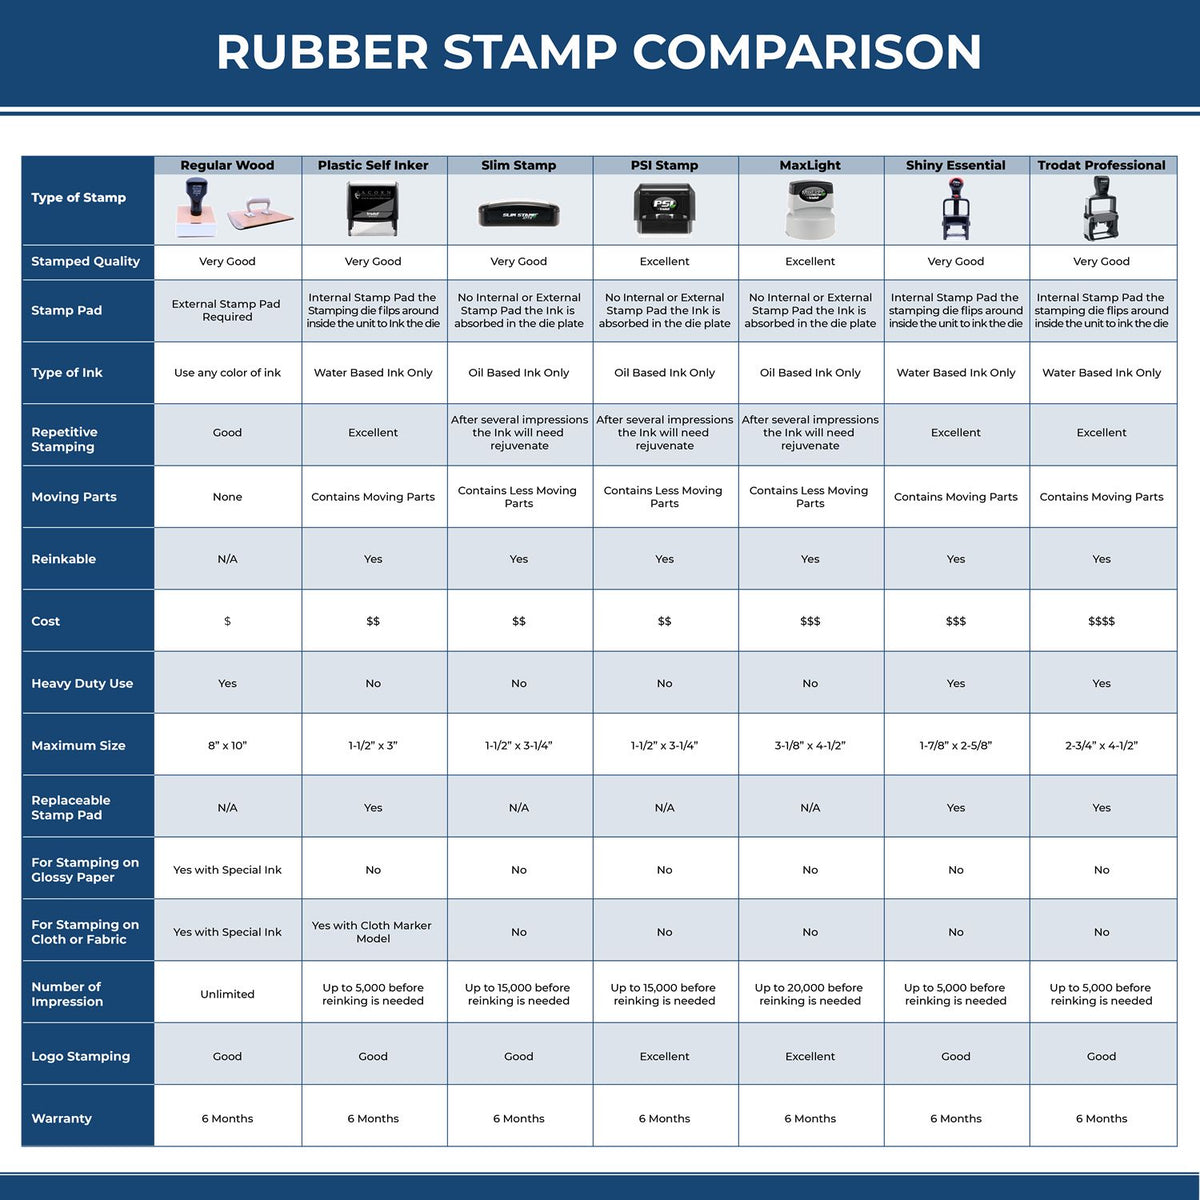 A comparison chart for the different types of mount models available for the Super Slim Rhode Island Notary Public Stamp.